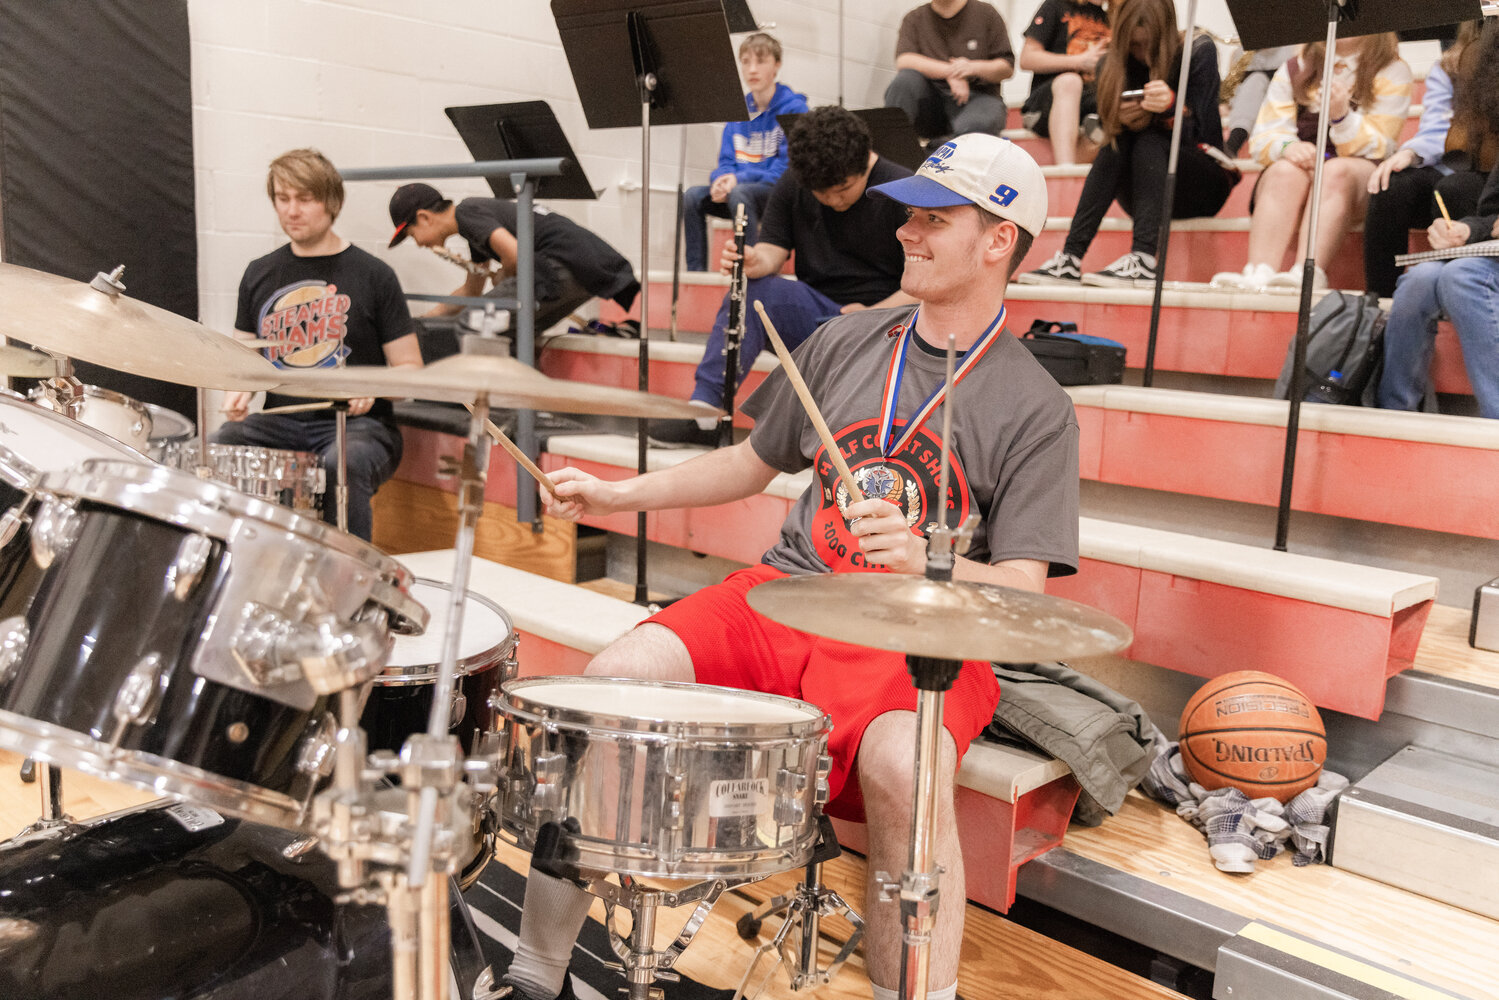 Chris Harvey smiles and beats on the drums after sinking a shot to mark 2,000 made half-court buckets at Toledo High School on Thursday, Sept. 21.